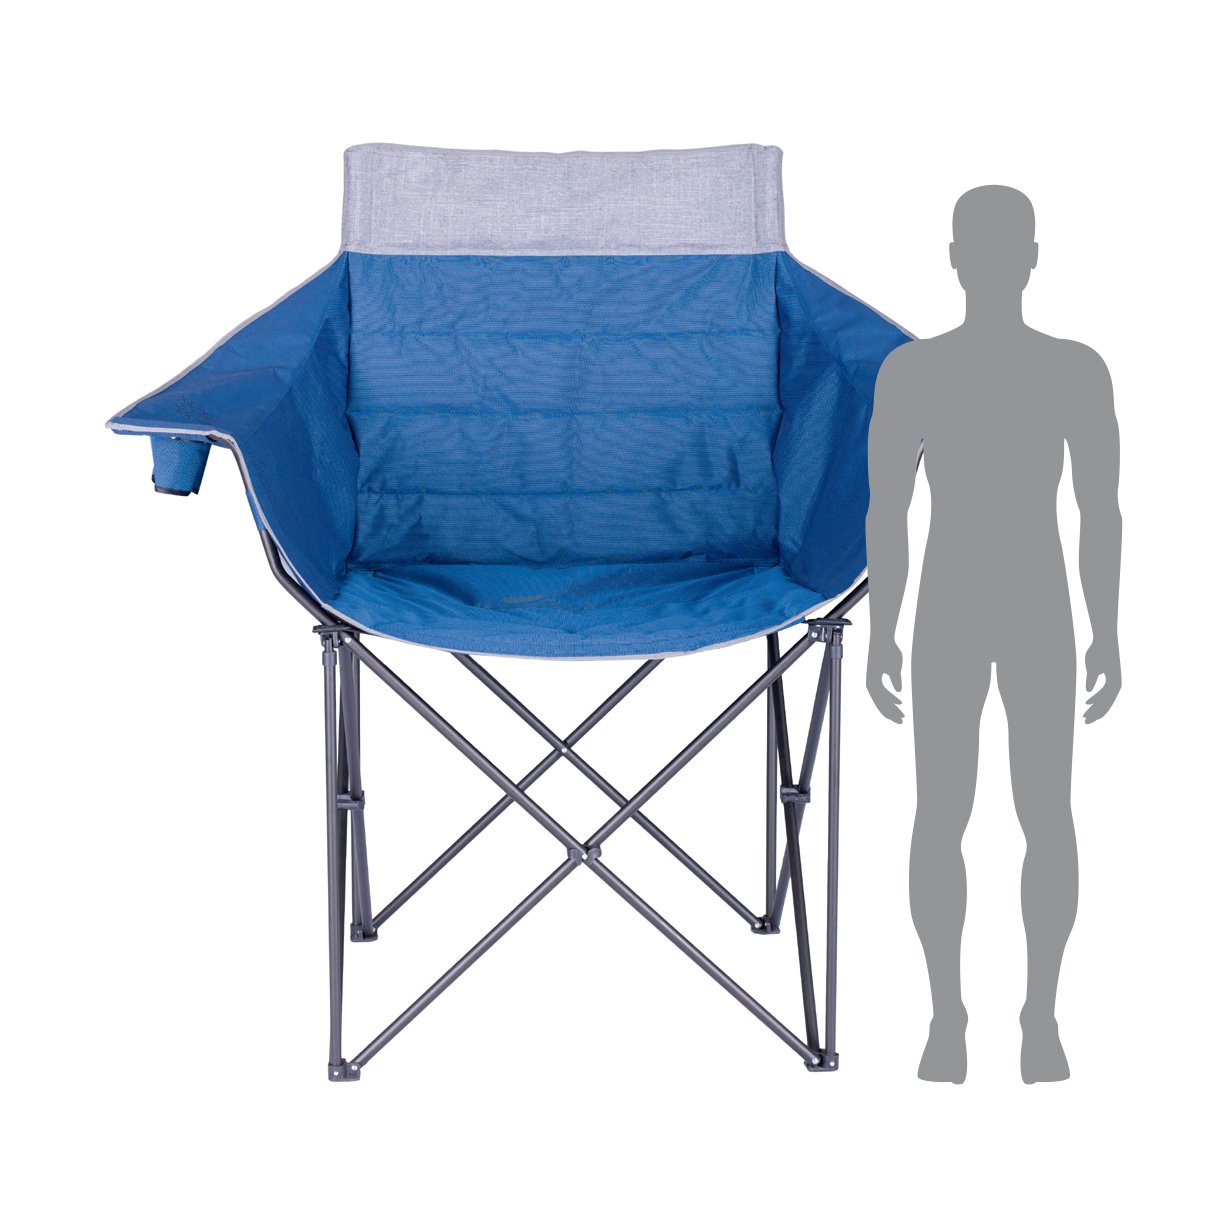 oz camping chairs